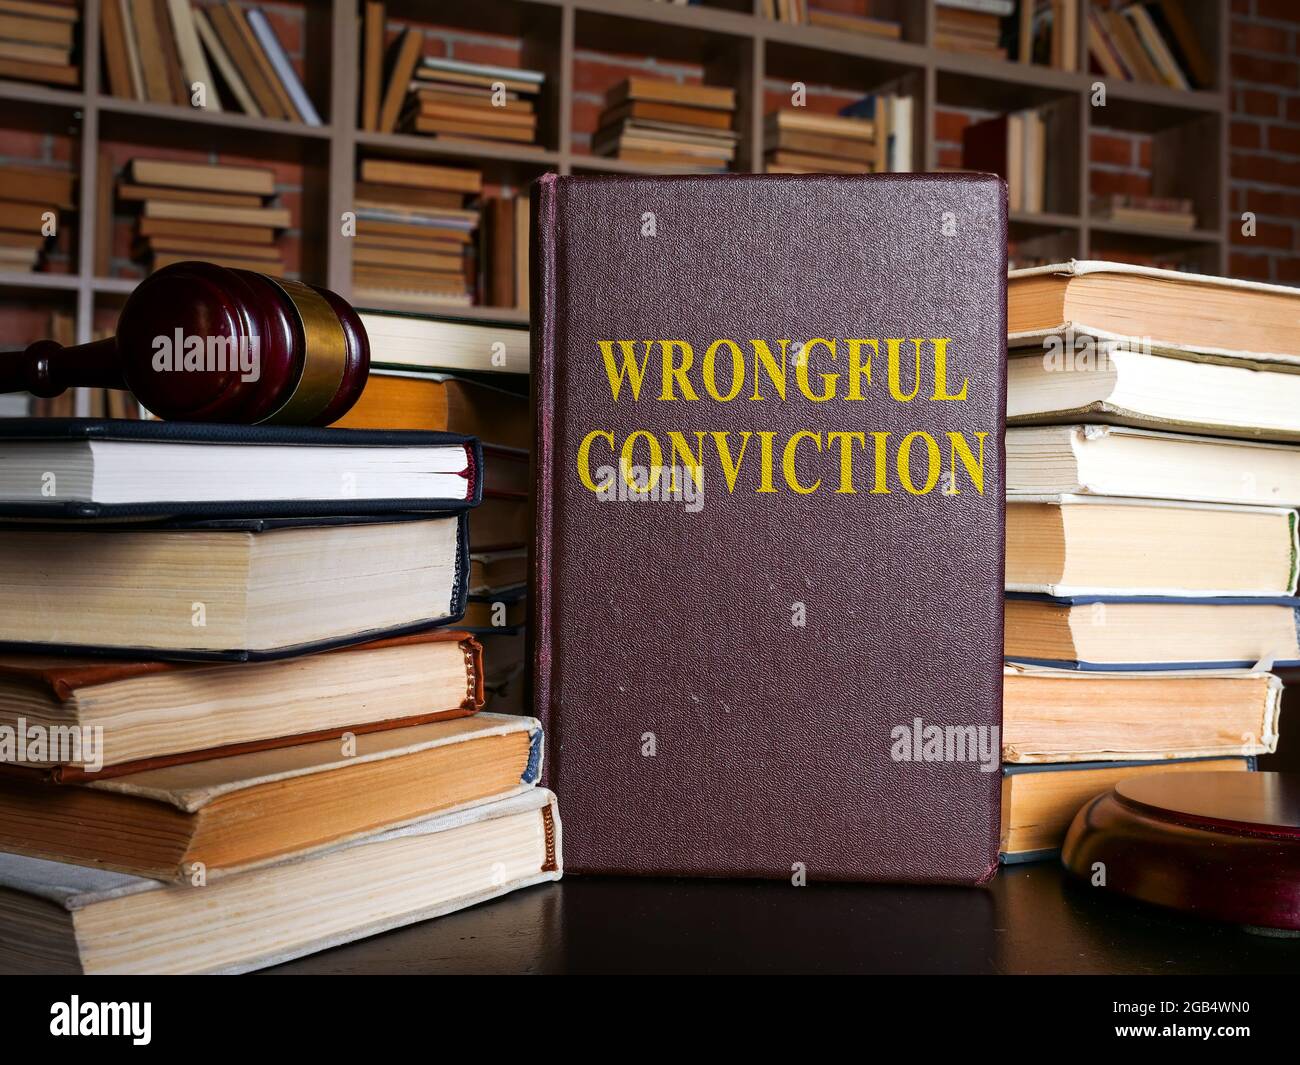 The book about Wrongful conviction and gavel. Stock Photo